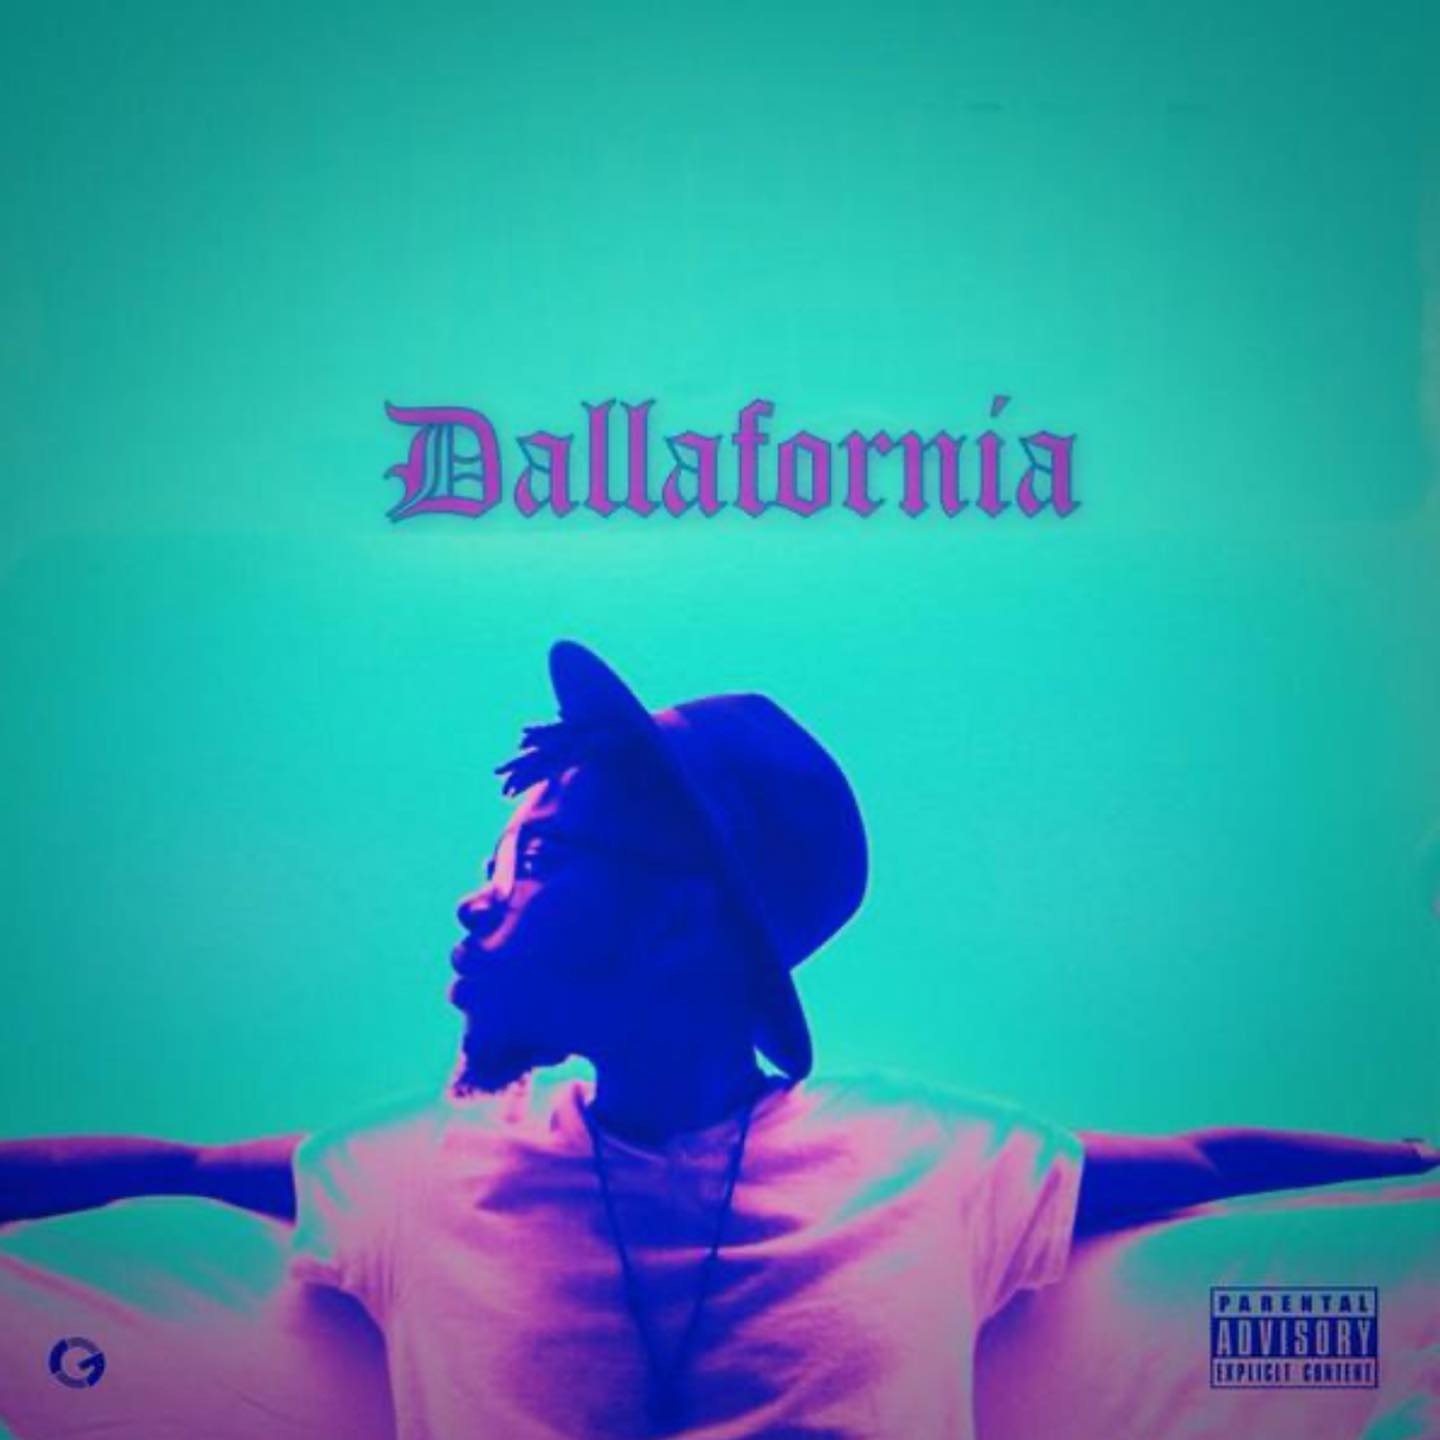 🚨New Music!🚨

🚨New Music!🚨

#Dallafornia2 IS OUT NOW ONLY ON MY PLATFORM!

There&rsquo;s a free streaming option for a limited time only!!! Go check it out and blaze one to my project! There&rsquo;s also a download option for $20 if you care to s